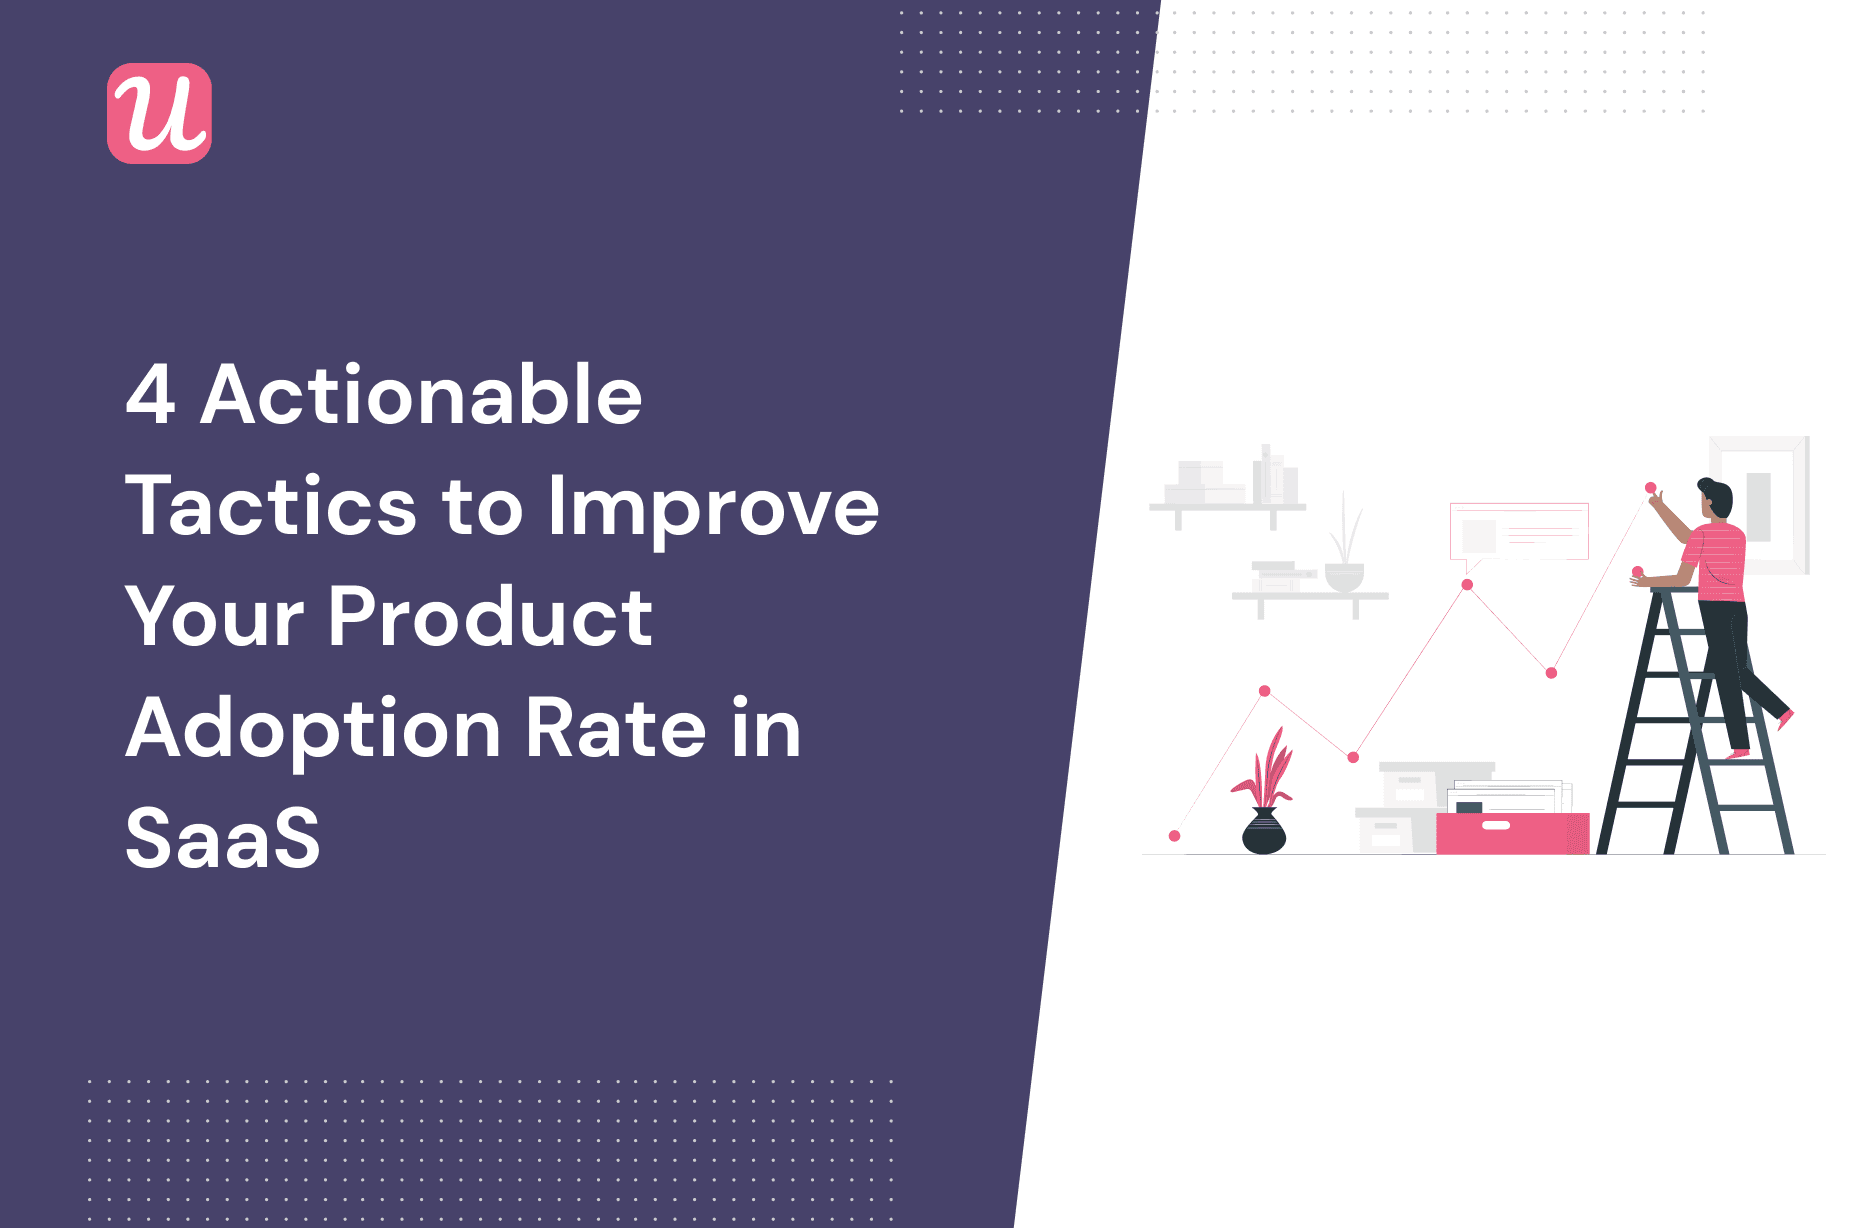 4 Actionable Tactics To Improve Your Product Adoption Rate in SaaS